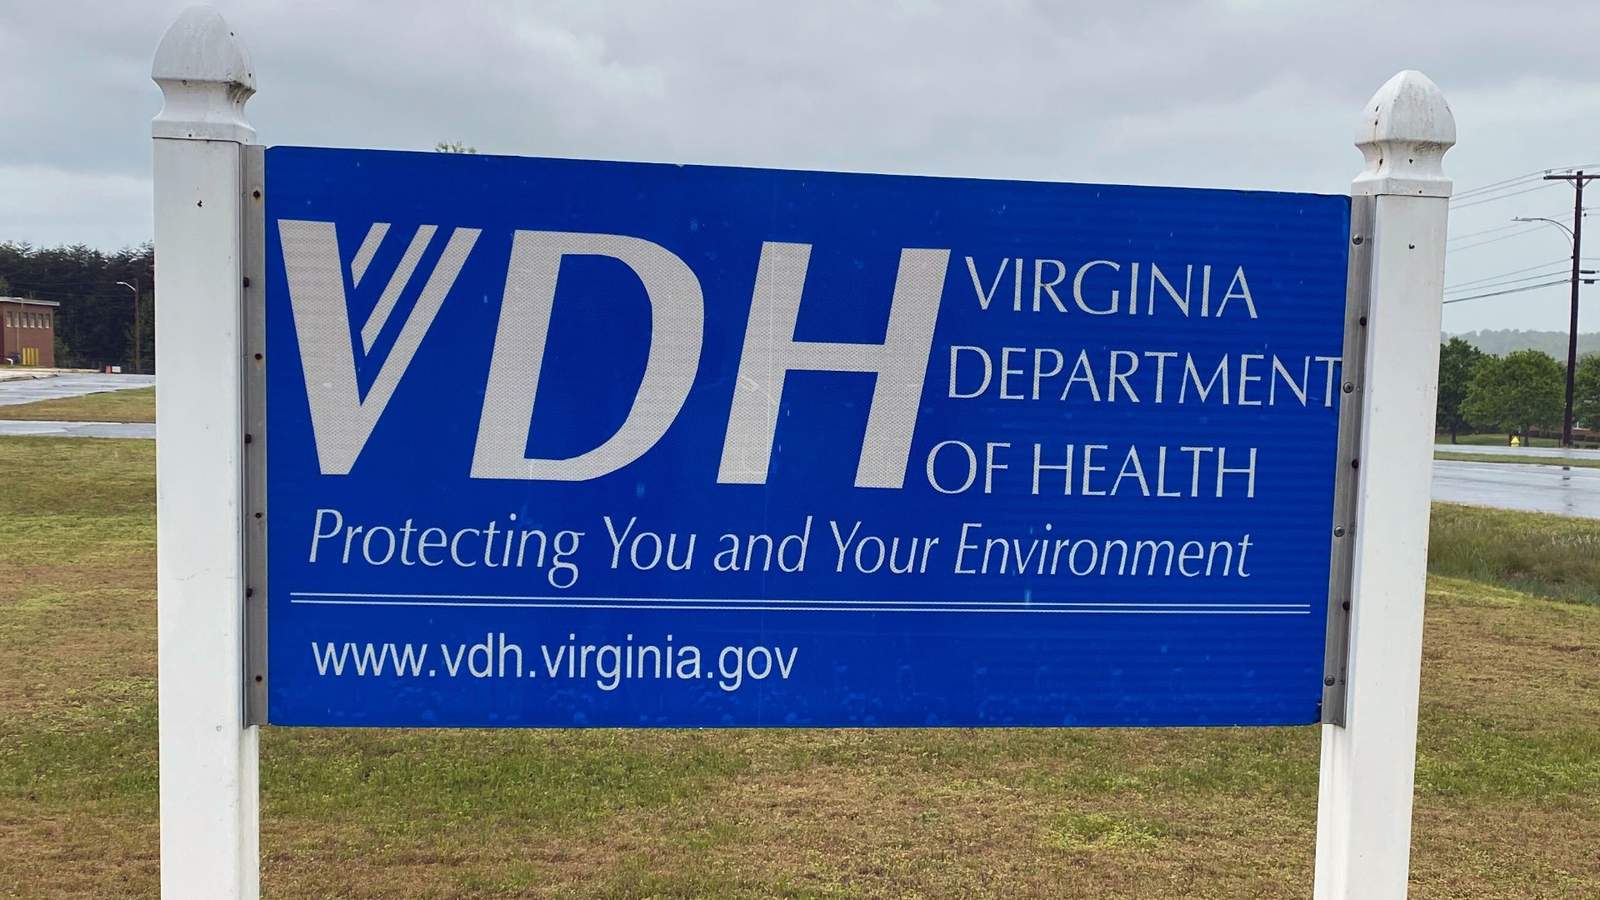 No, Virginia’s coronavirus contact tracers will not ask for money or your SSN